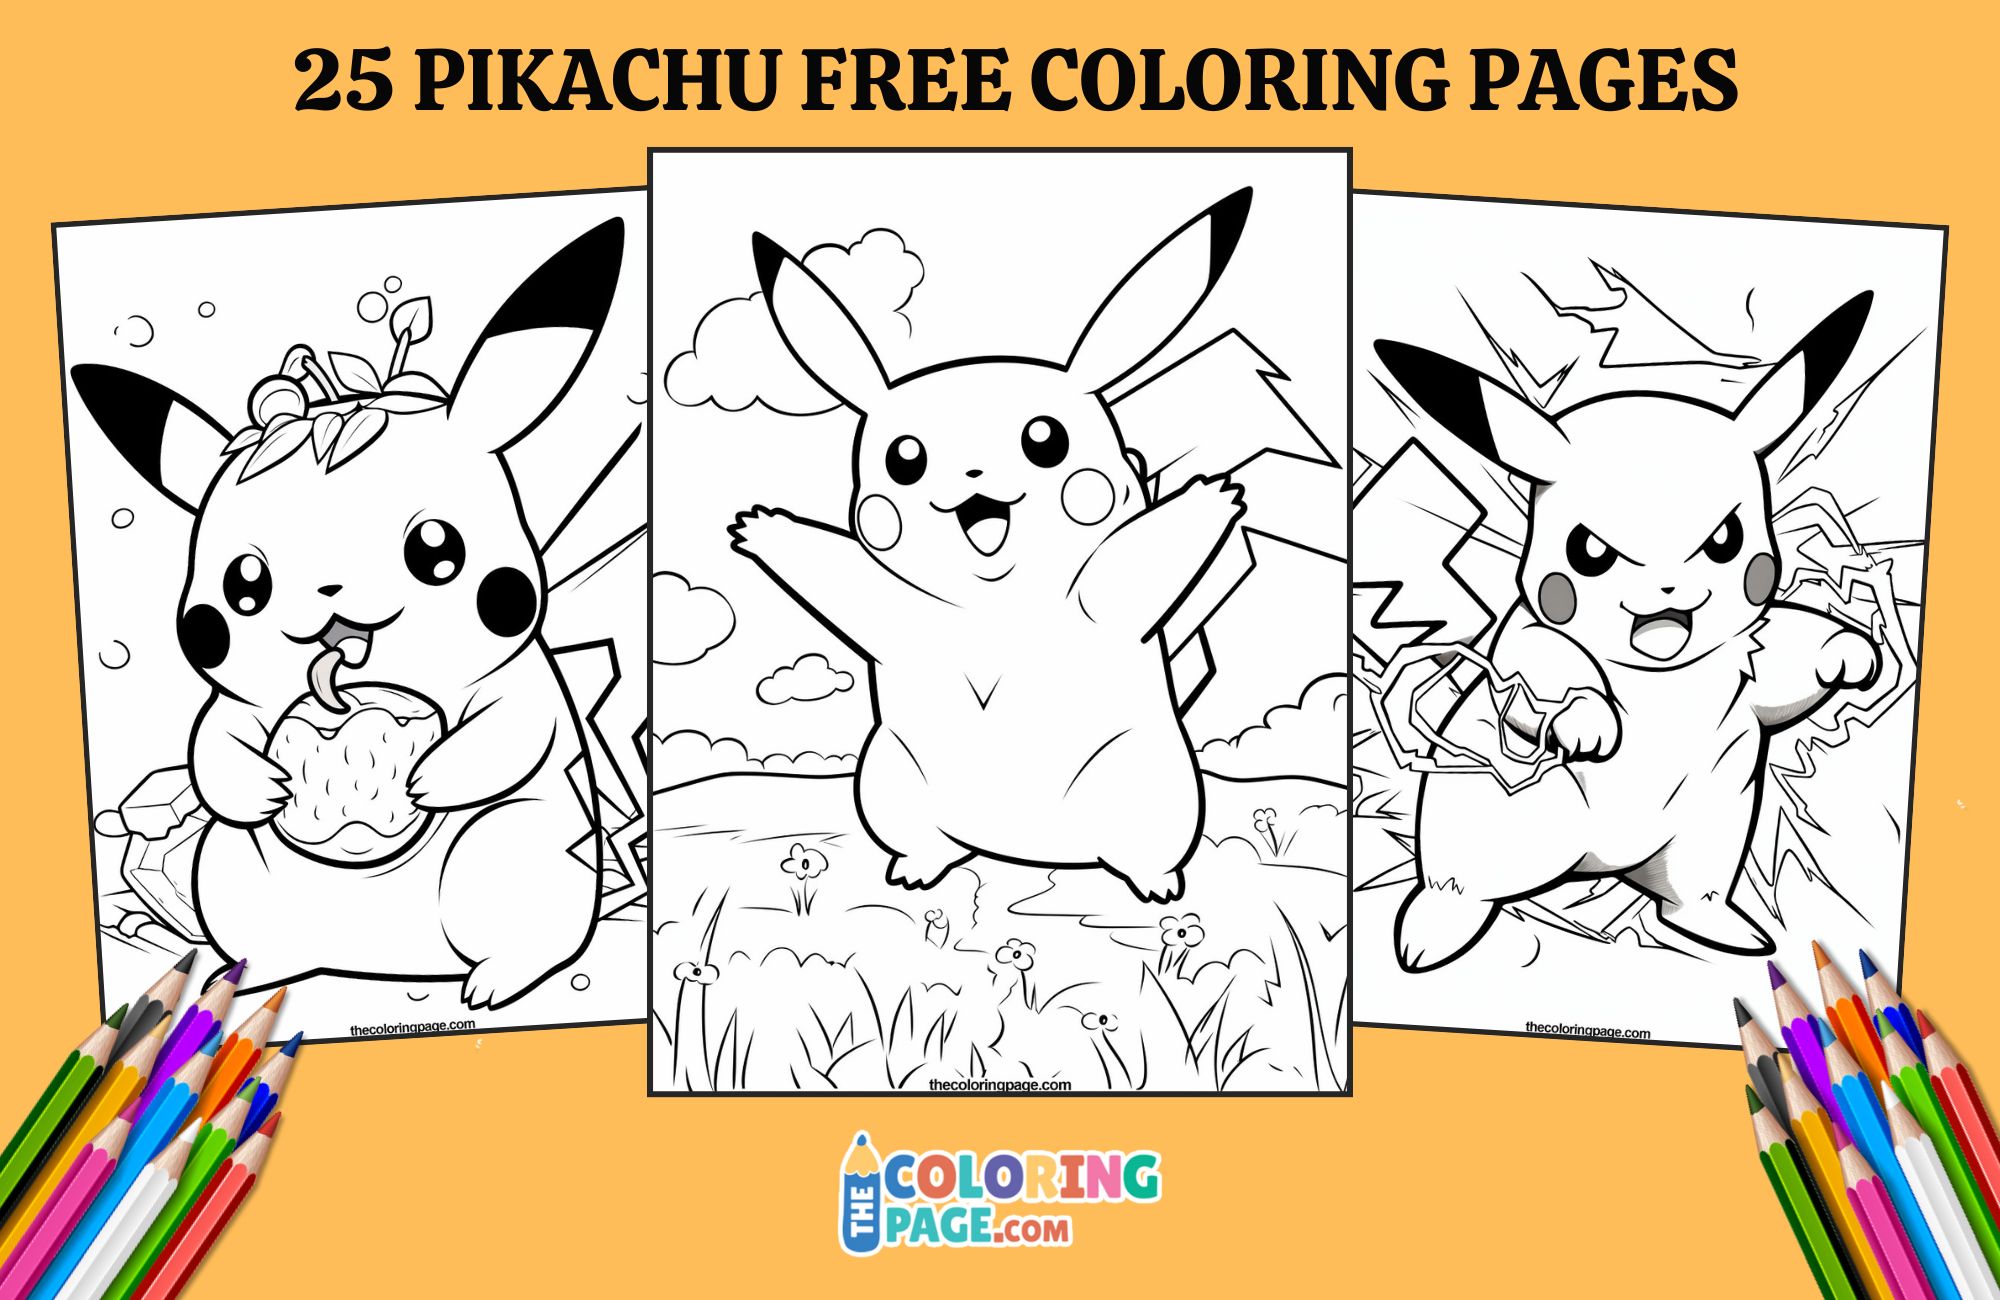 25 Pikachu Coloring Pages for kids